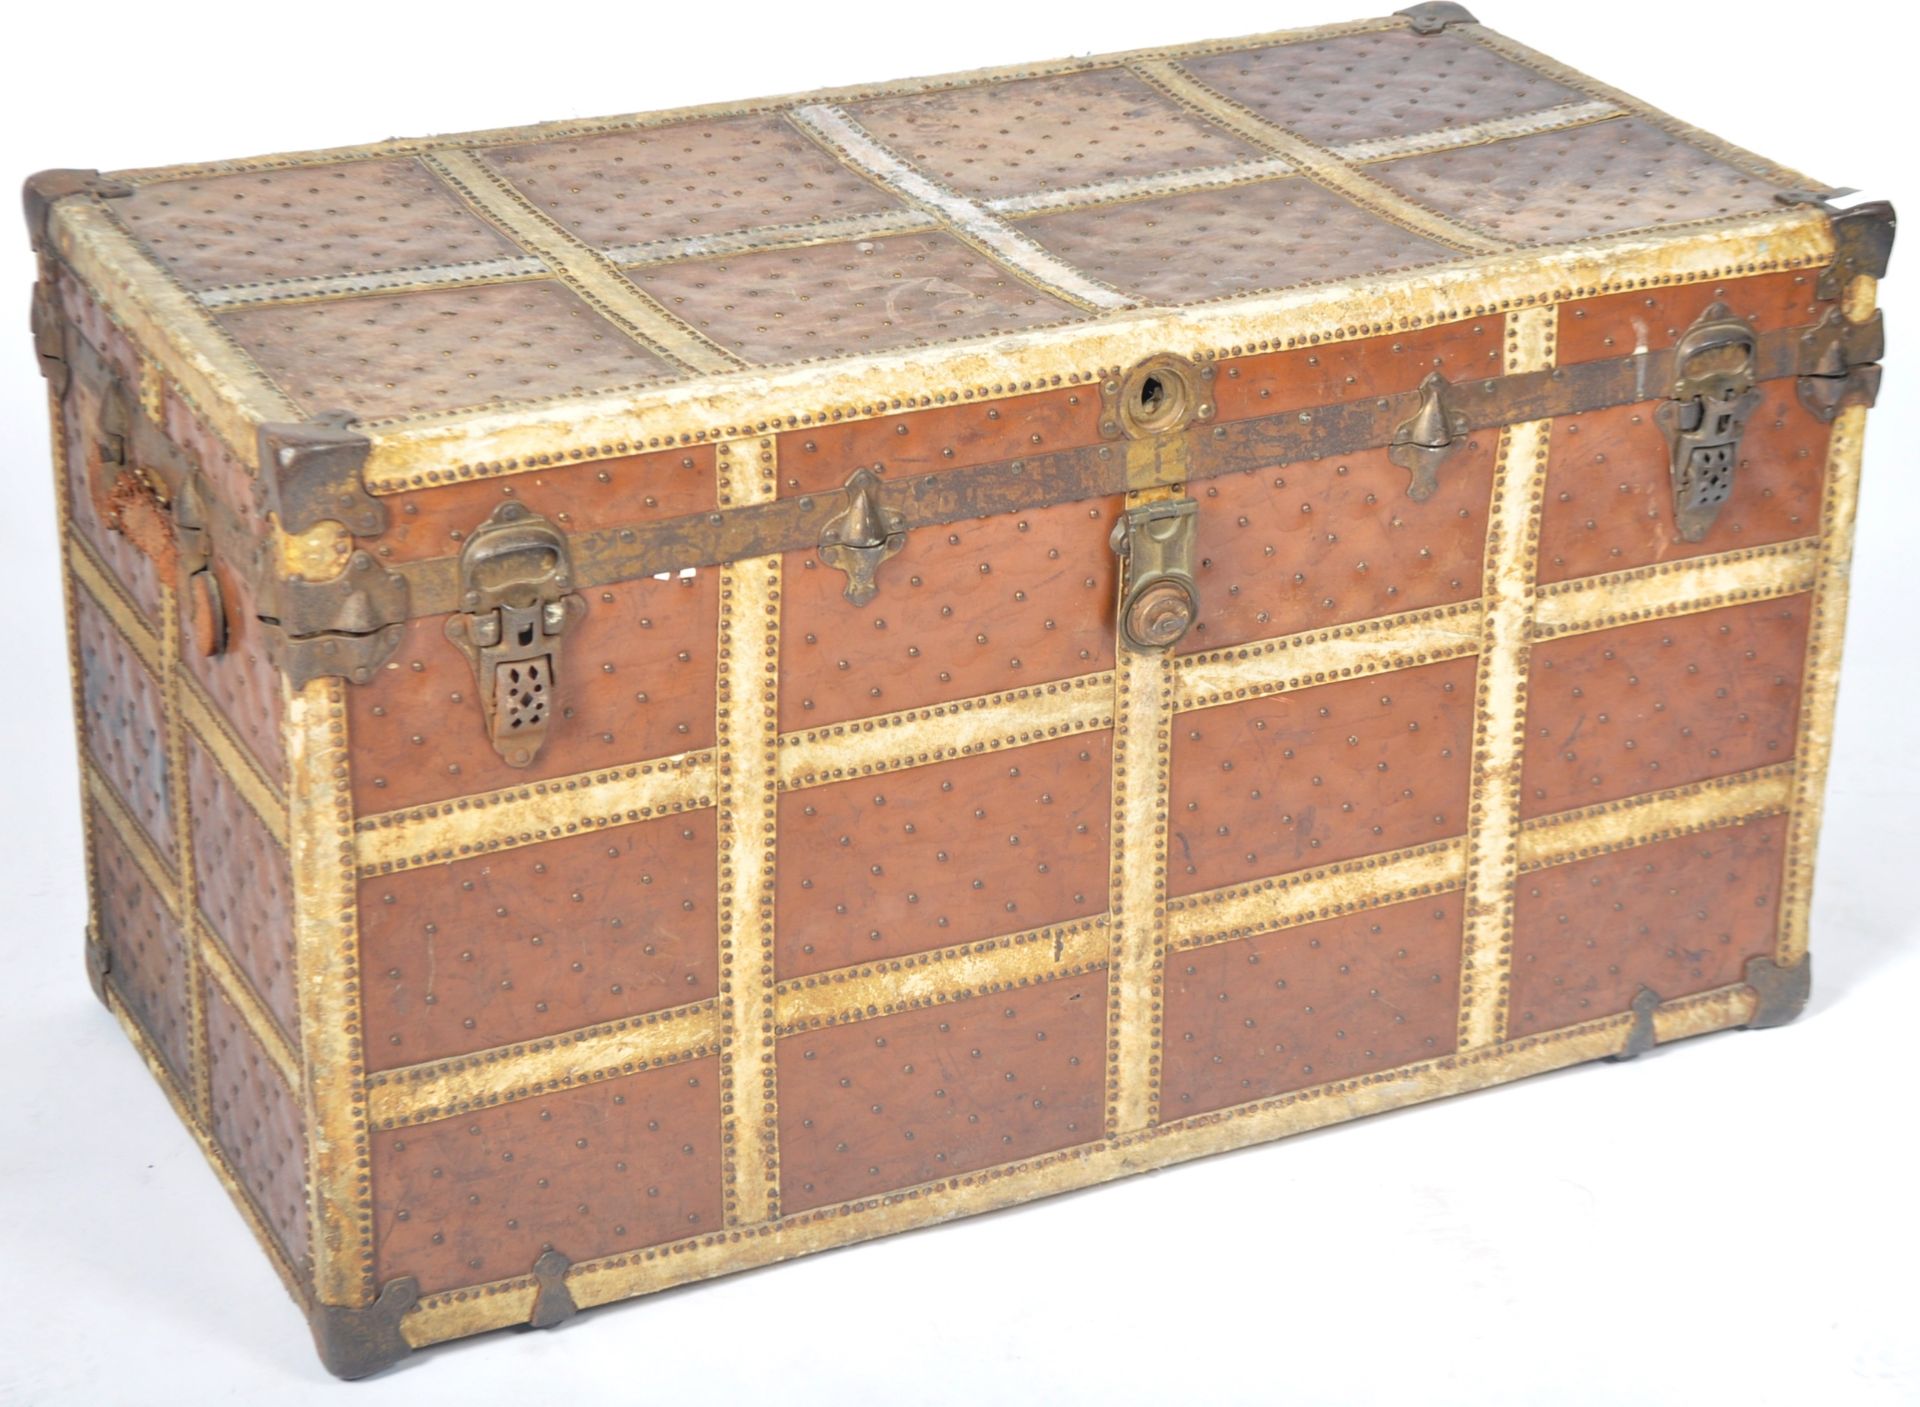 ANTIQUE 20TH CENTURY TRAVEL STEAMER TRUNK BELIEVED LOUIS VUITTON - Image 2 of 7